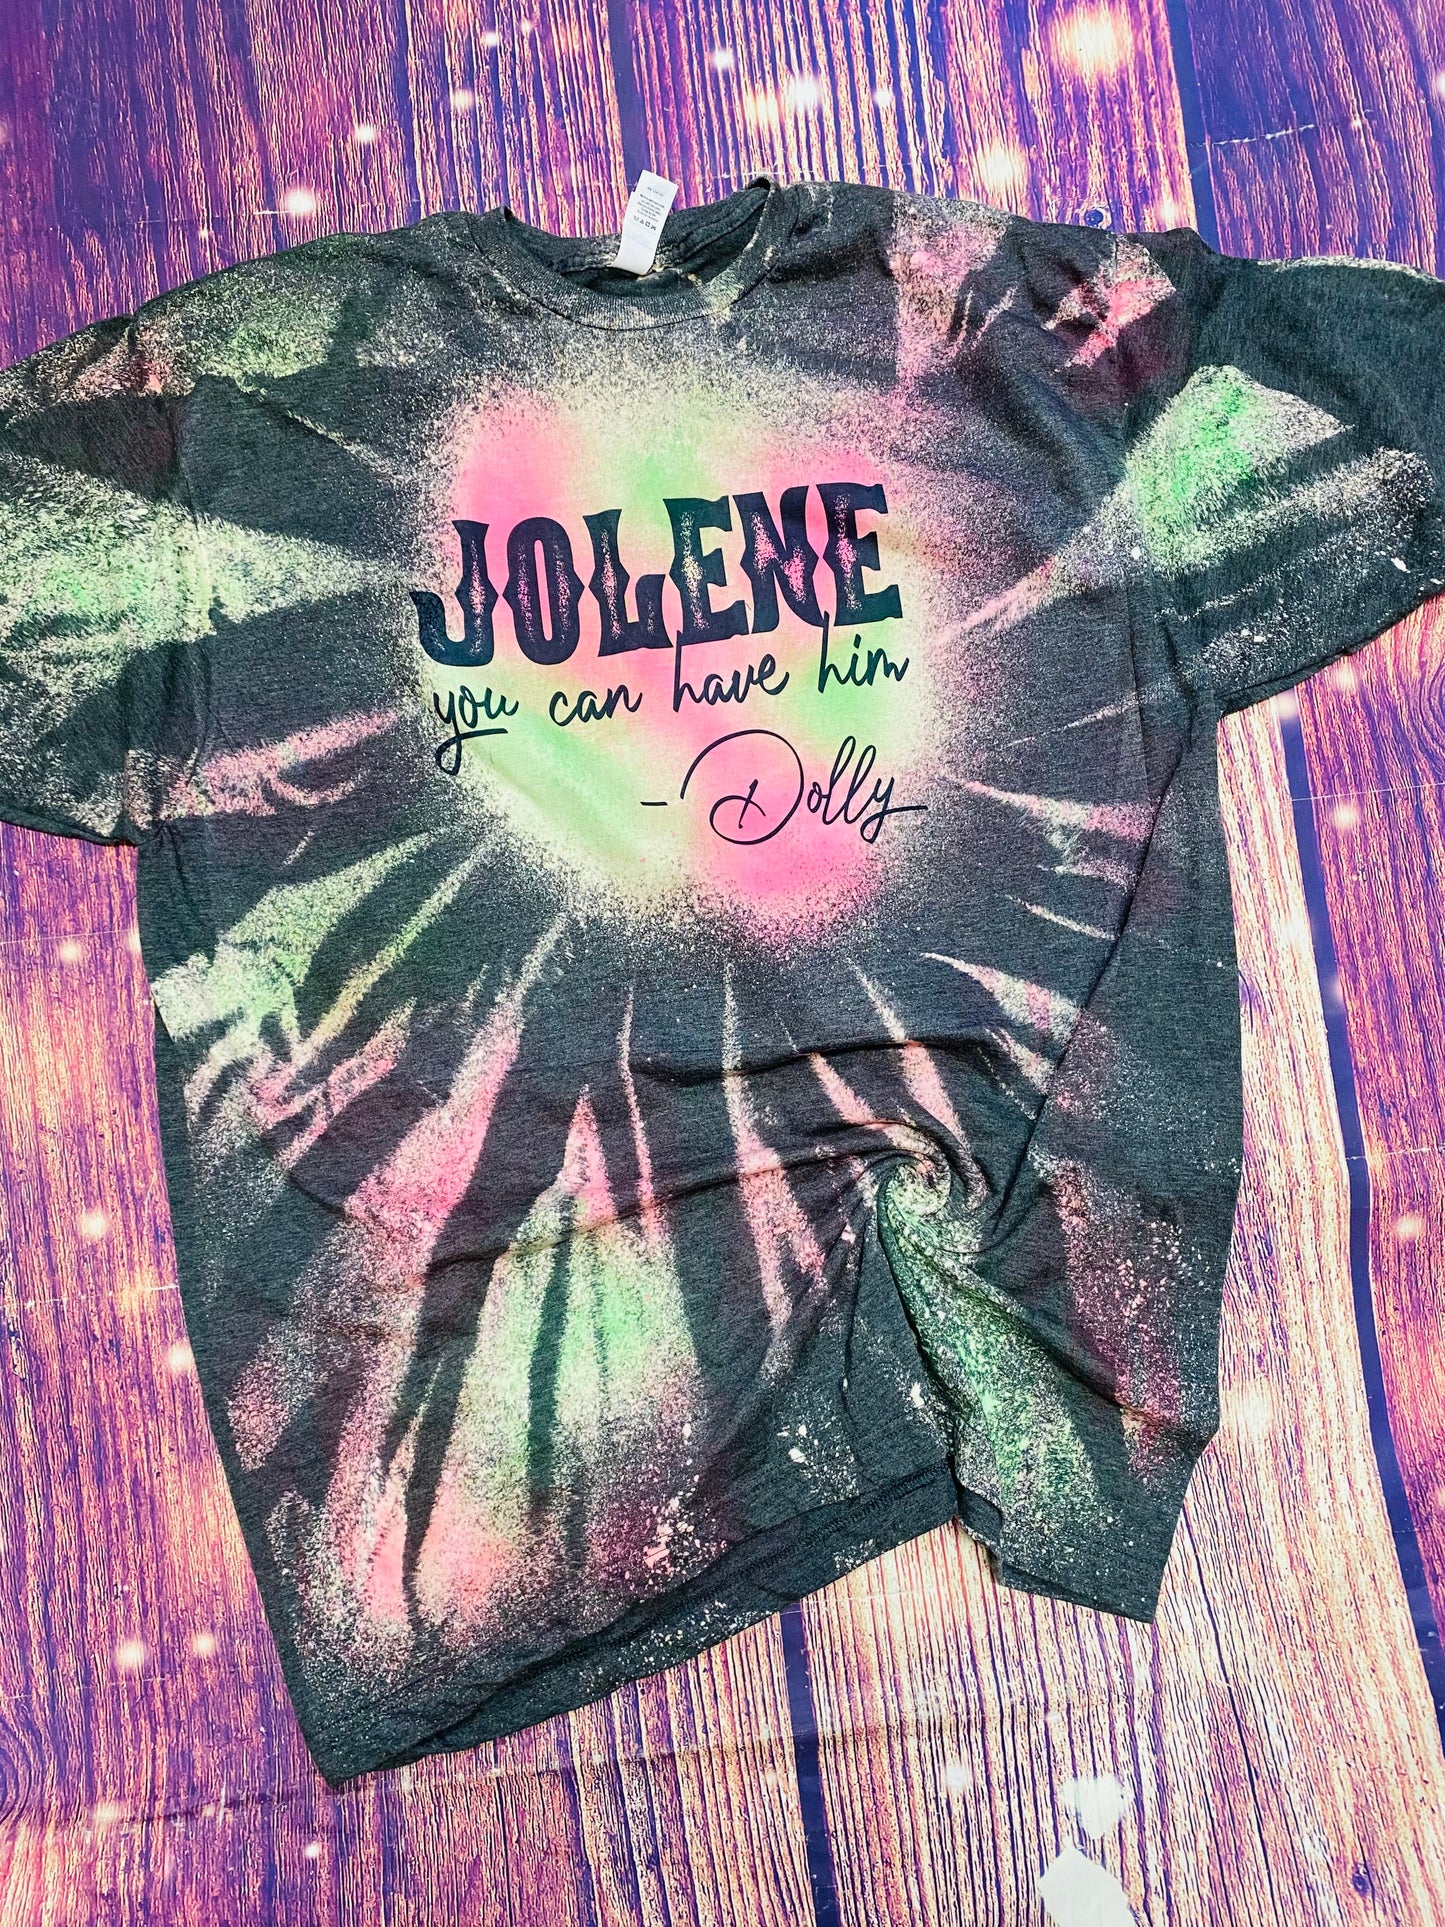 Jolene You can have him reverse tie dye Tee